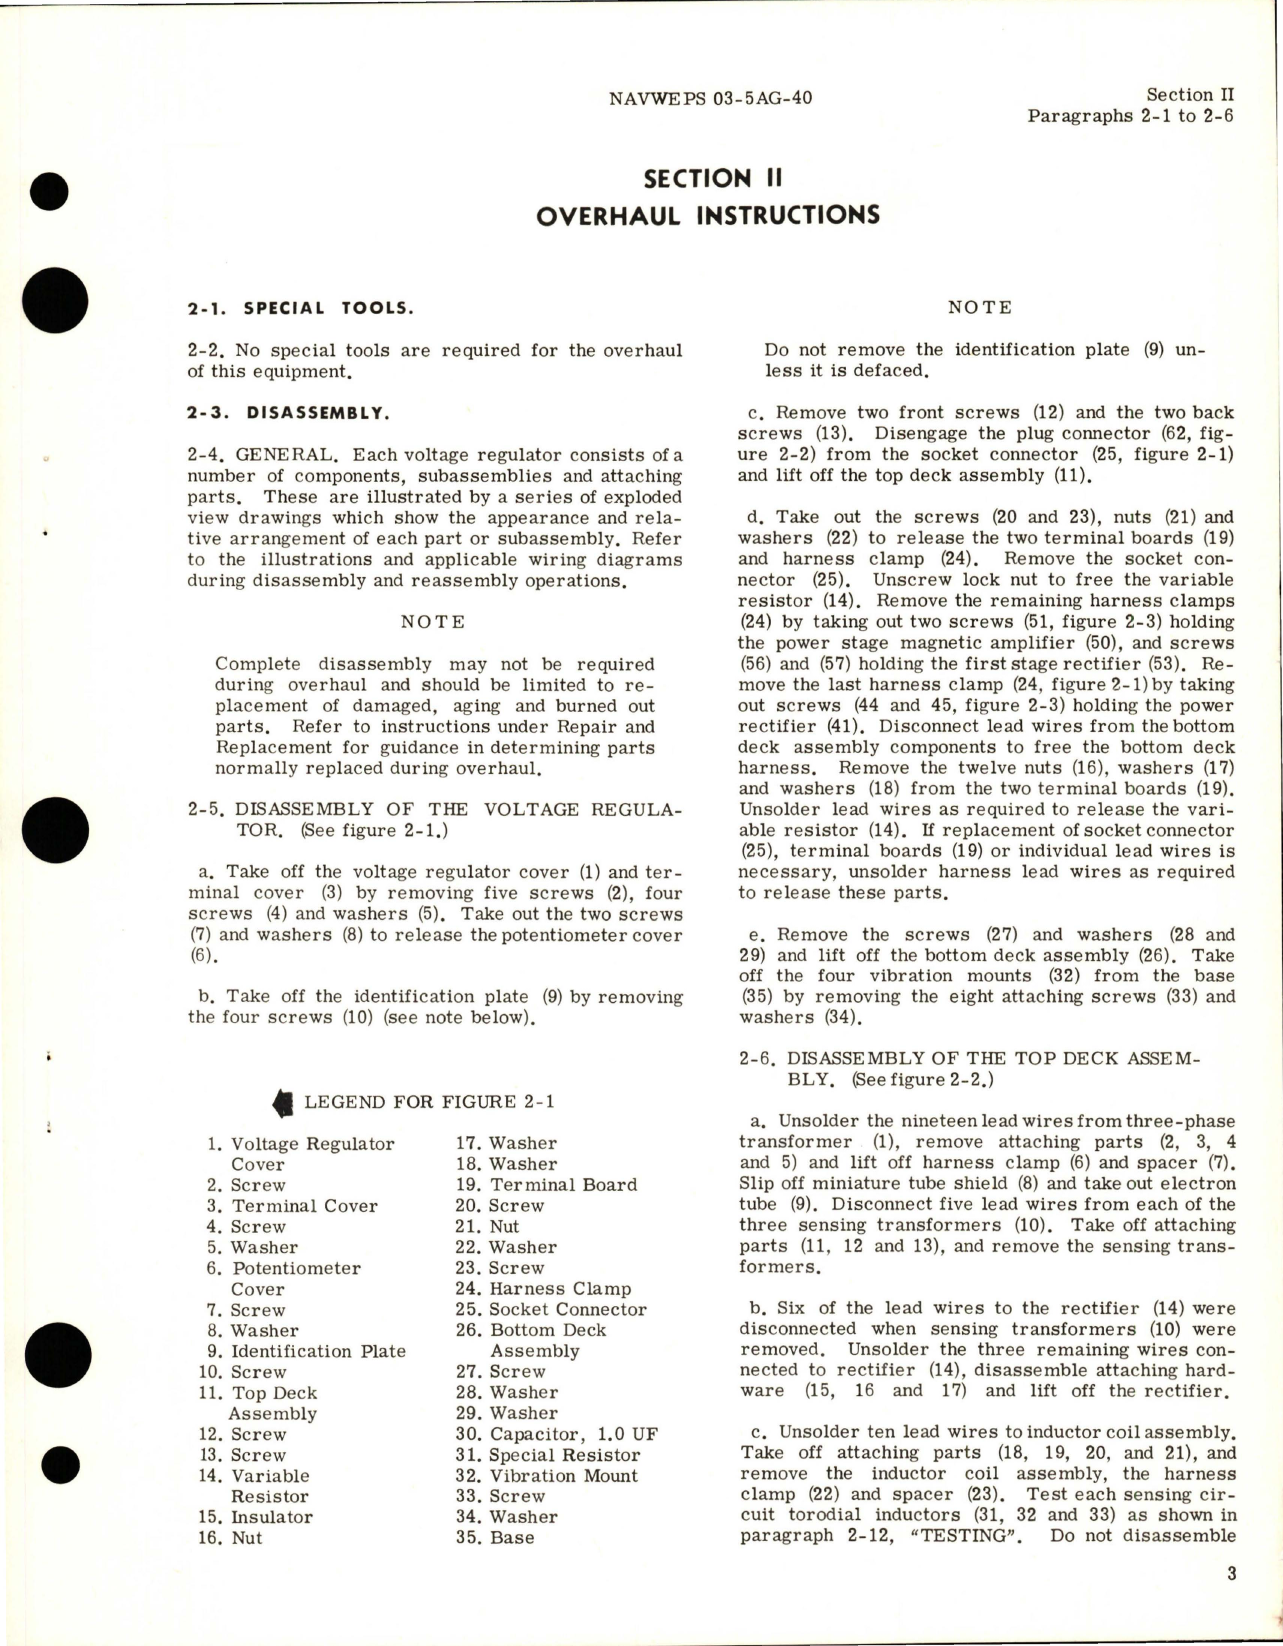 Sample page 7 from AirCorps Library document: Overhaul Instructions for Voltage Regulator - Model 51107-003